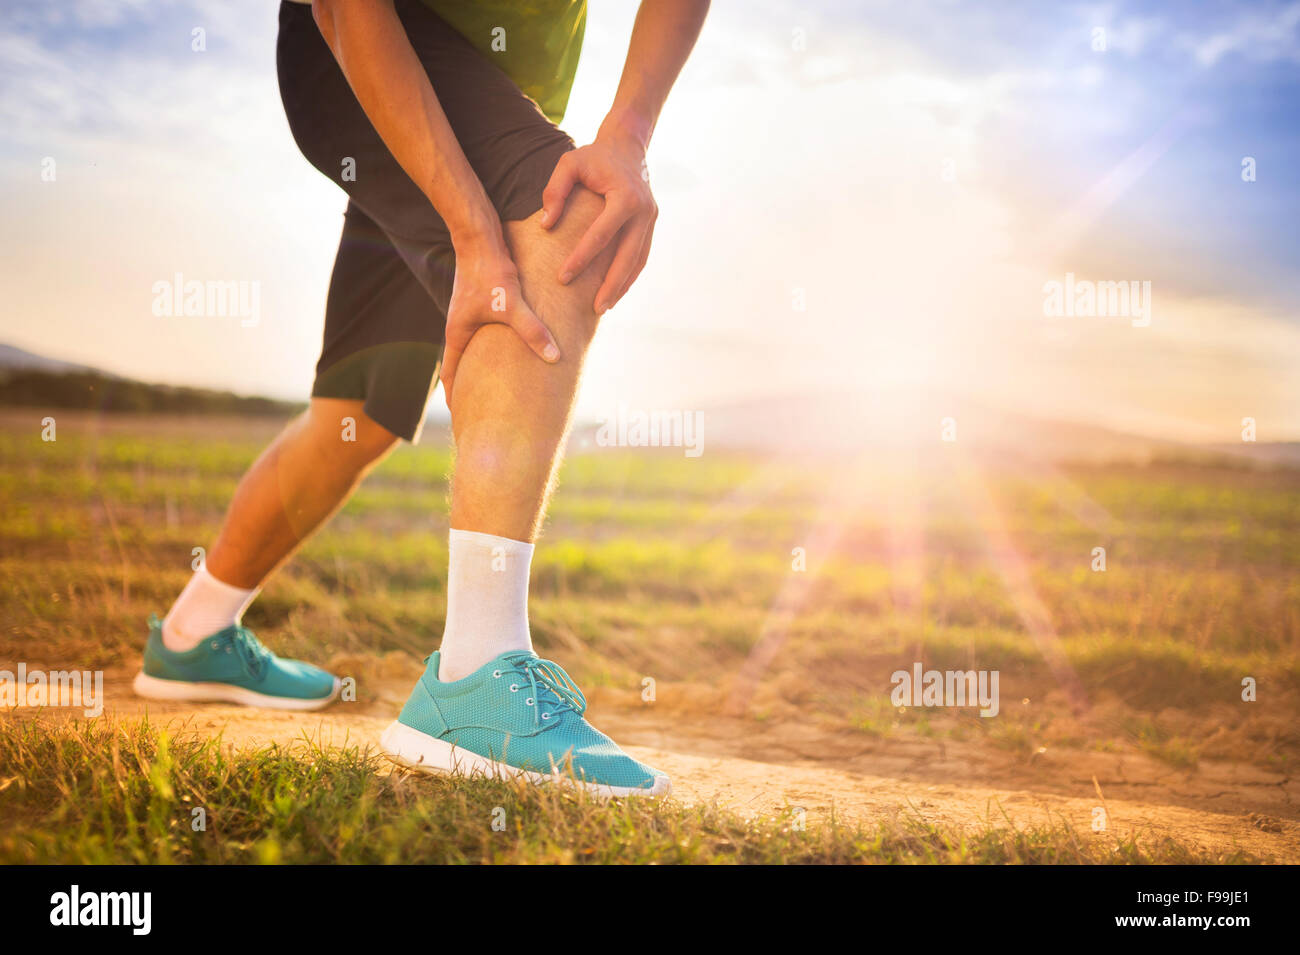 Runner leg and muscle pain during running training outdoors in summer nature Stock Photo